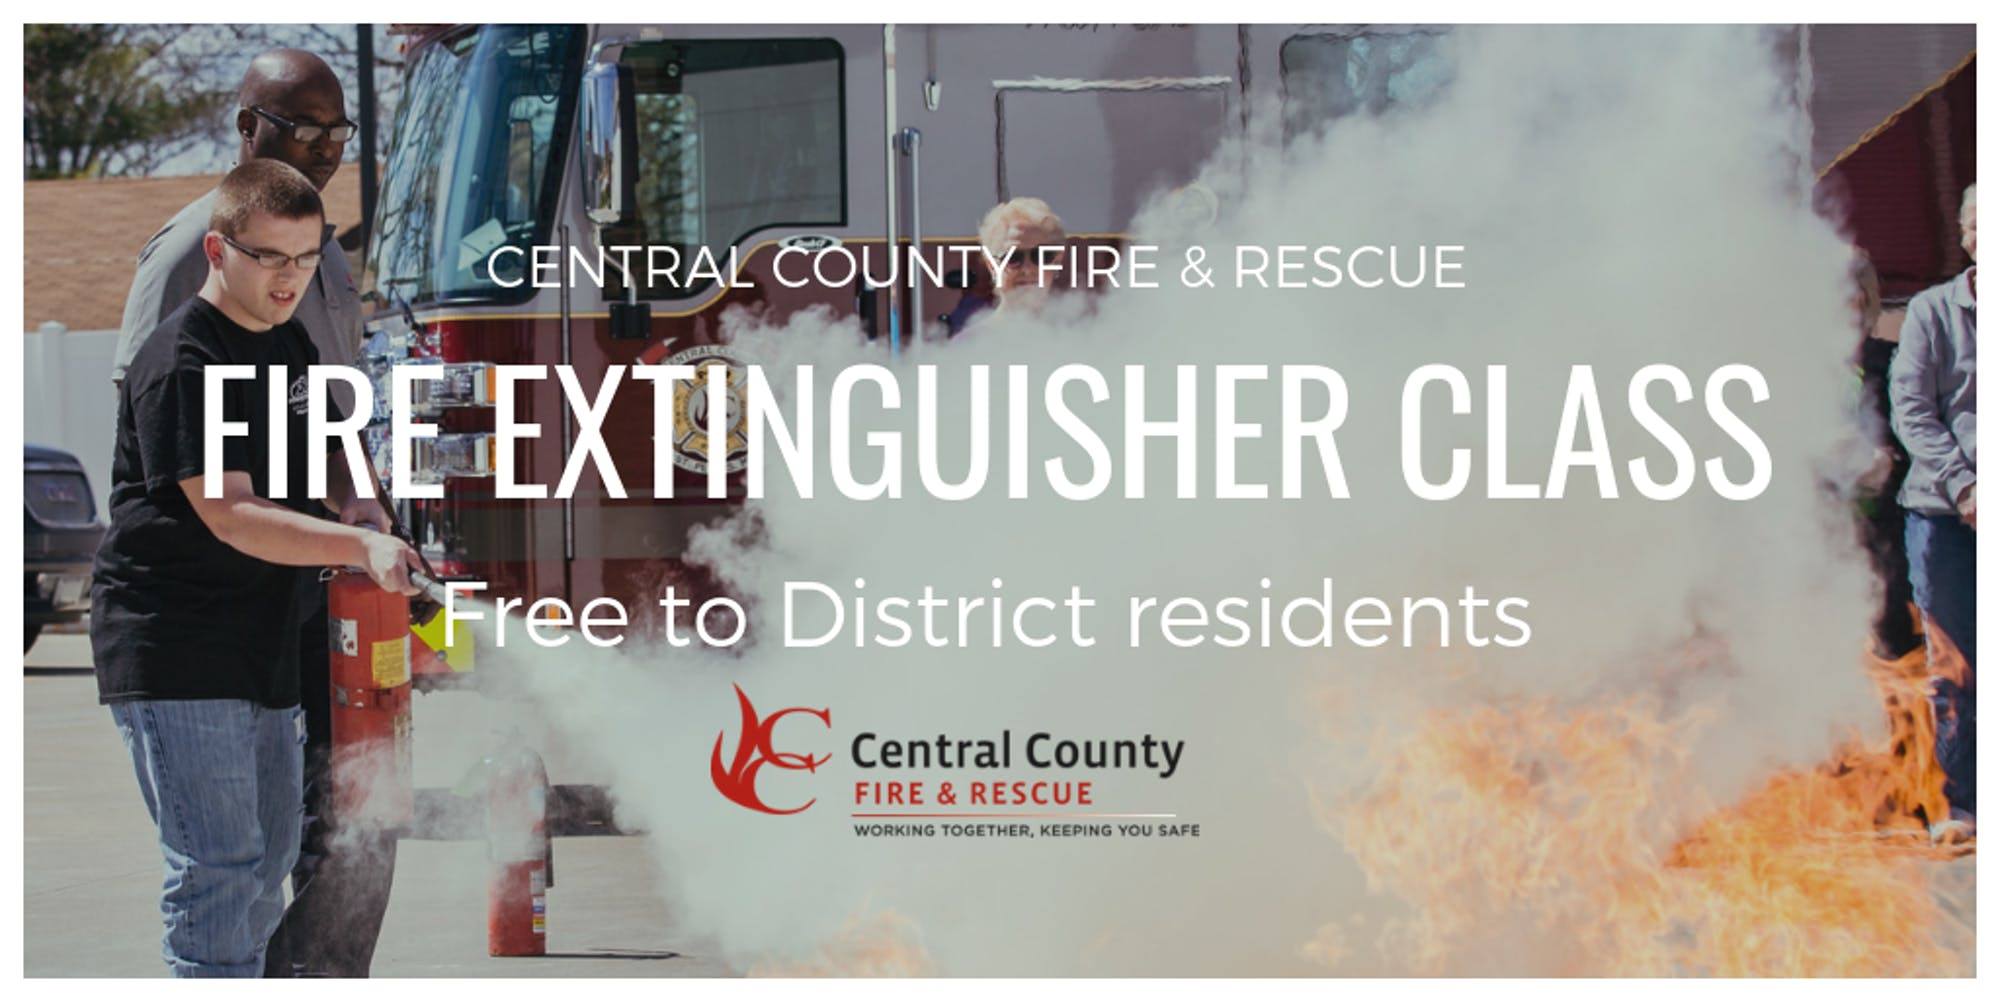 An images showing s man extinguishing a fire with fire extinguisher and text that says "Fire Extinguisher Class Free to District Residents"